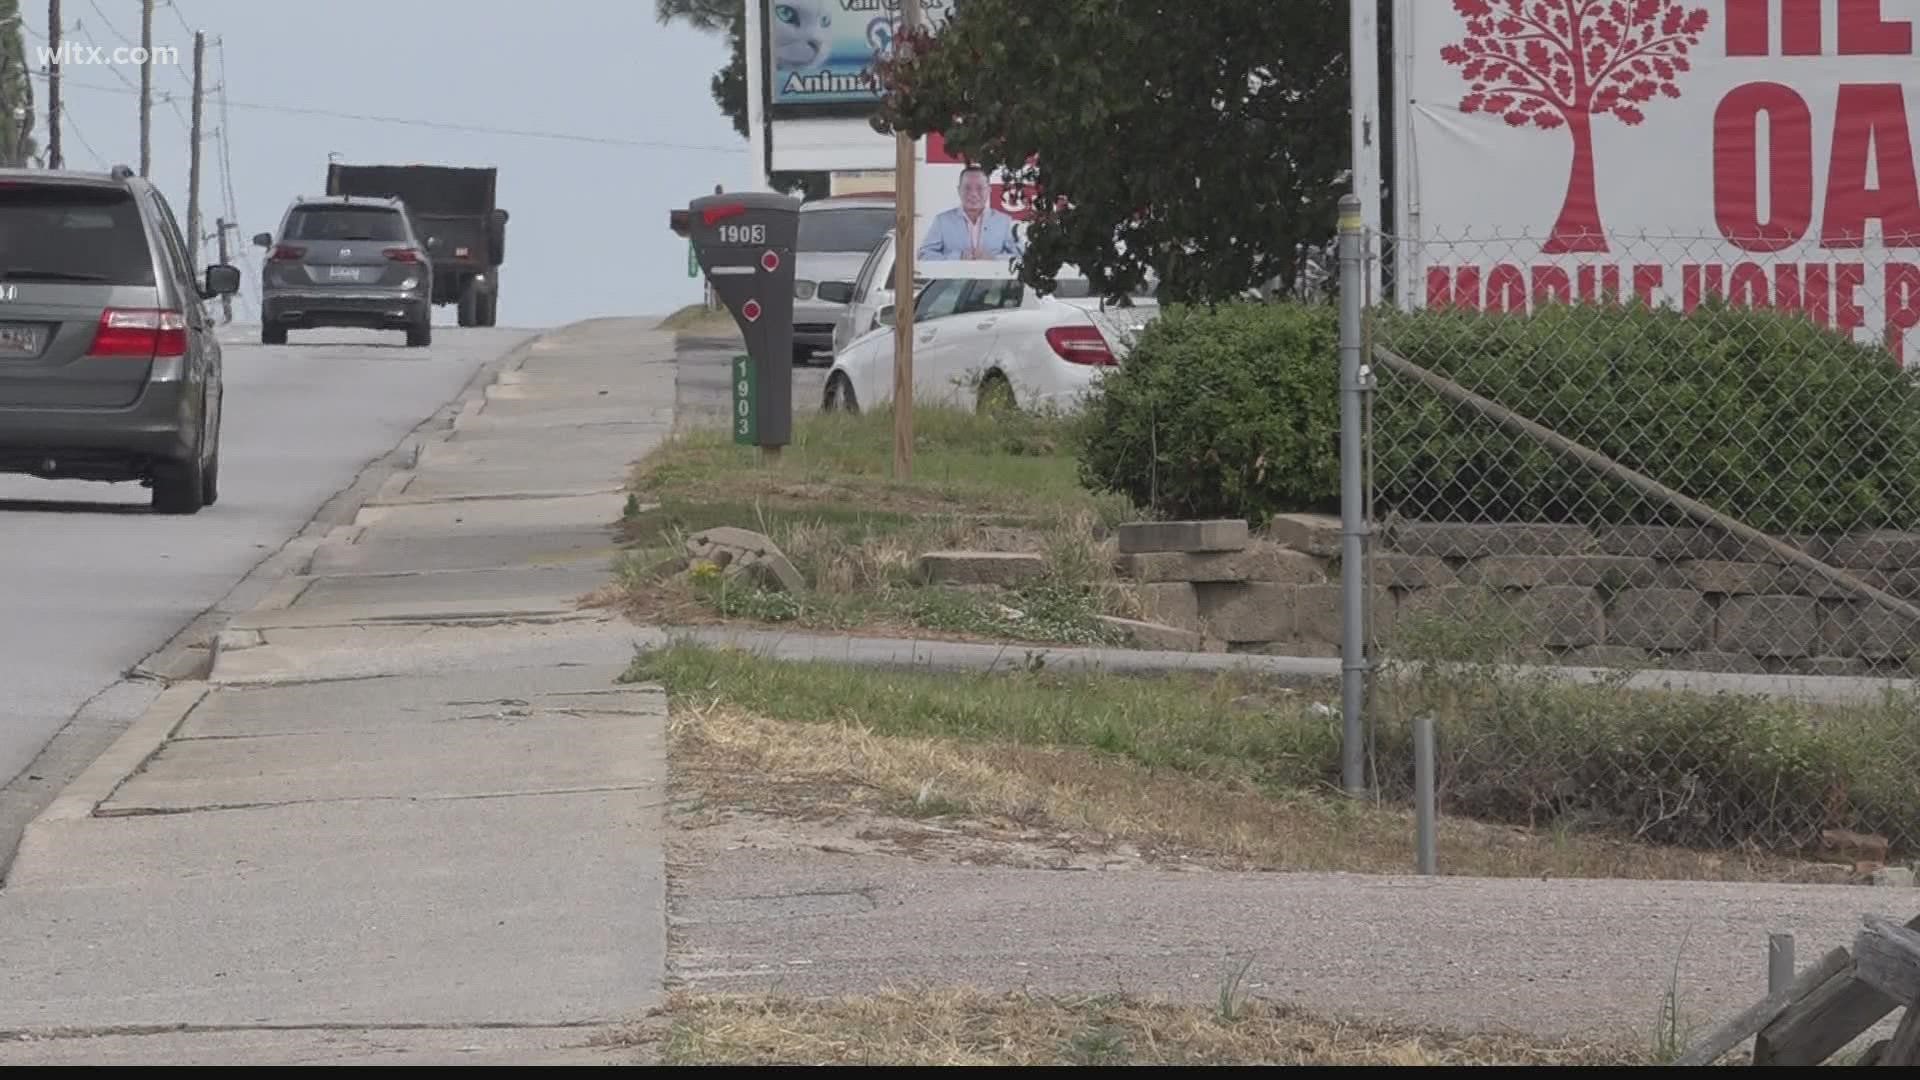 West Columbia's Beautification Foundation is working to improve the landscape along Highway One.